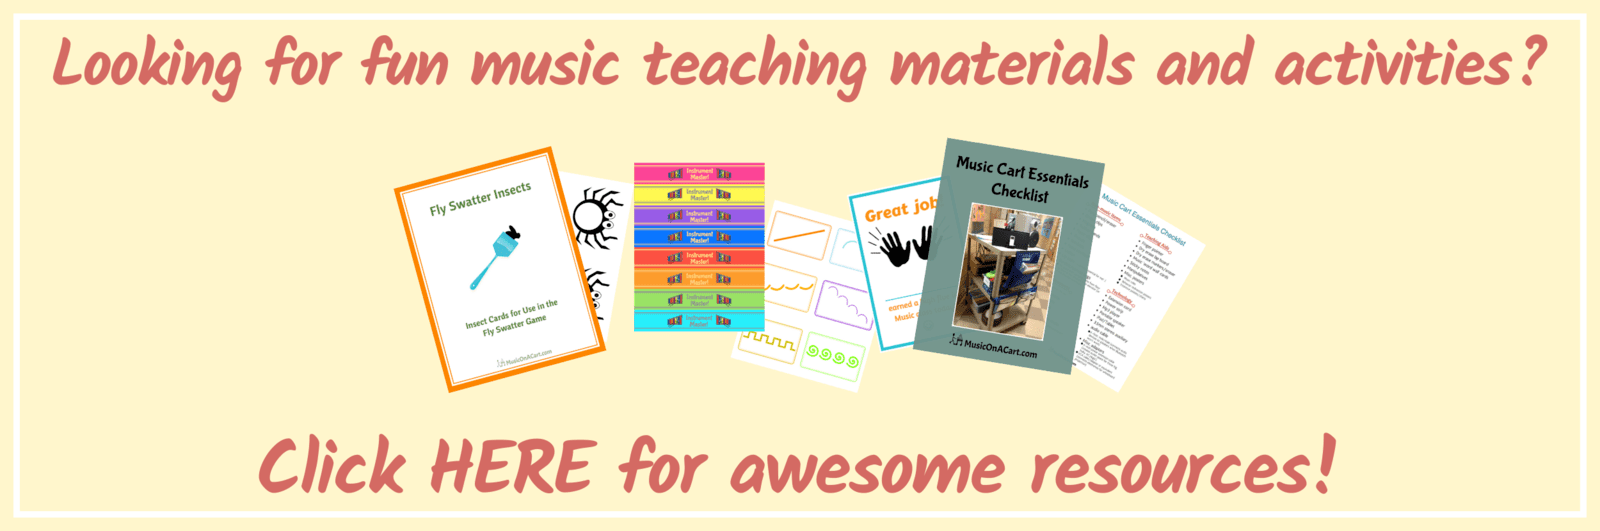 Elementary music resources and teaching inspiration | www.MusicOnACart.com